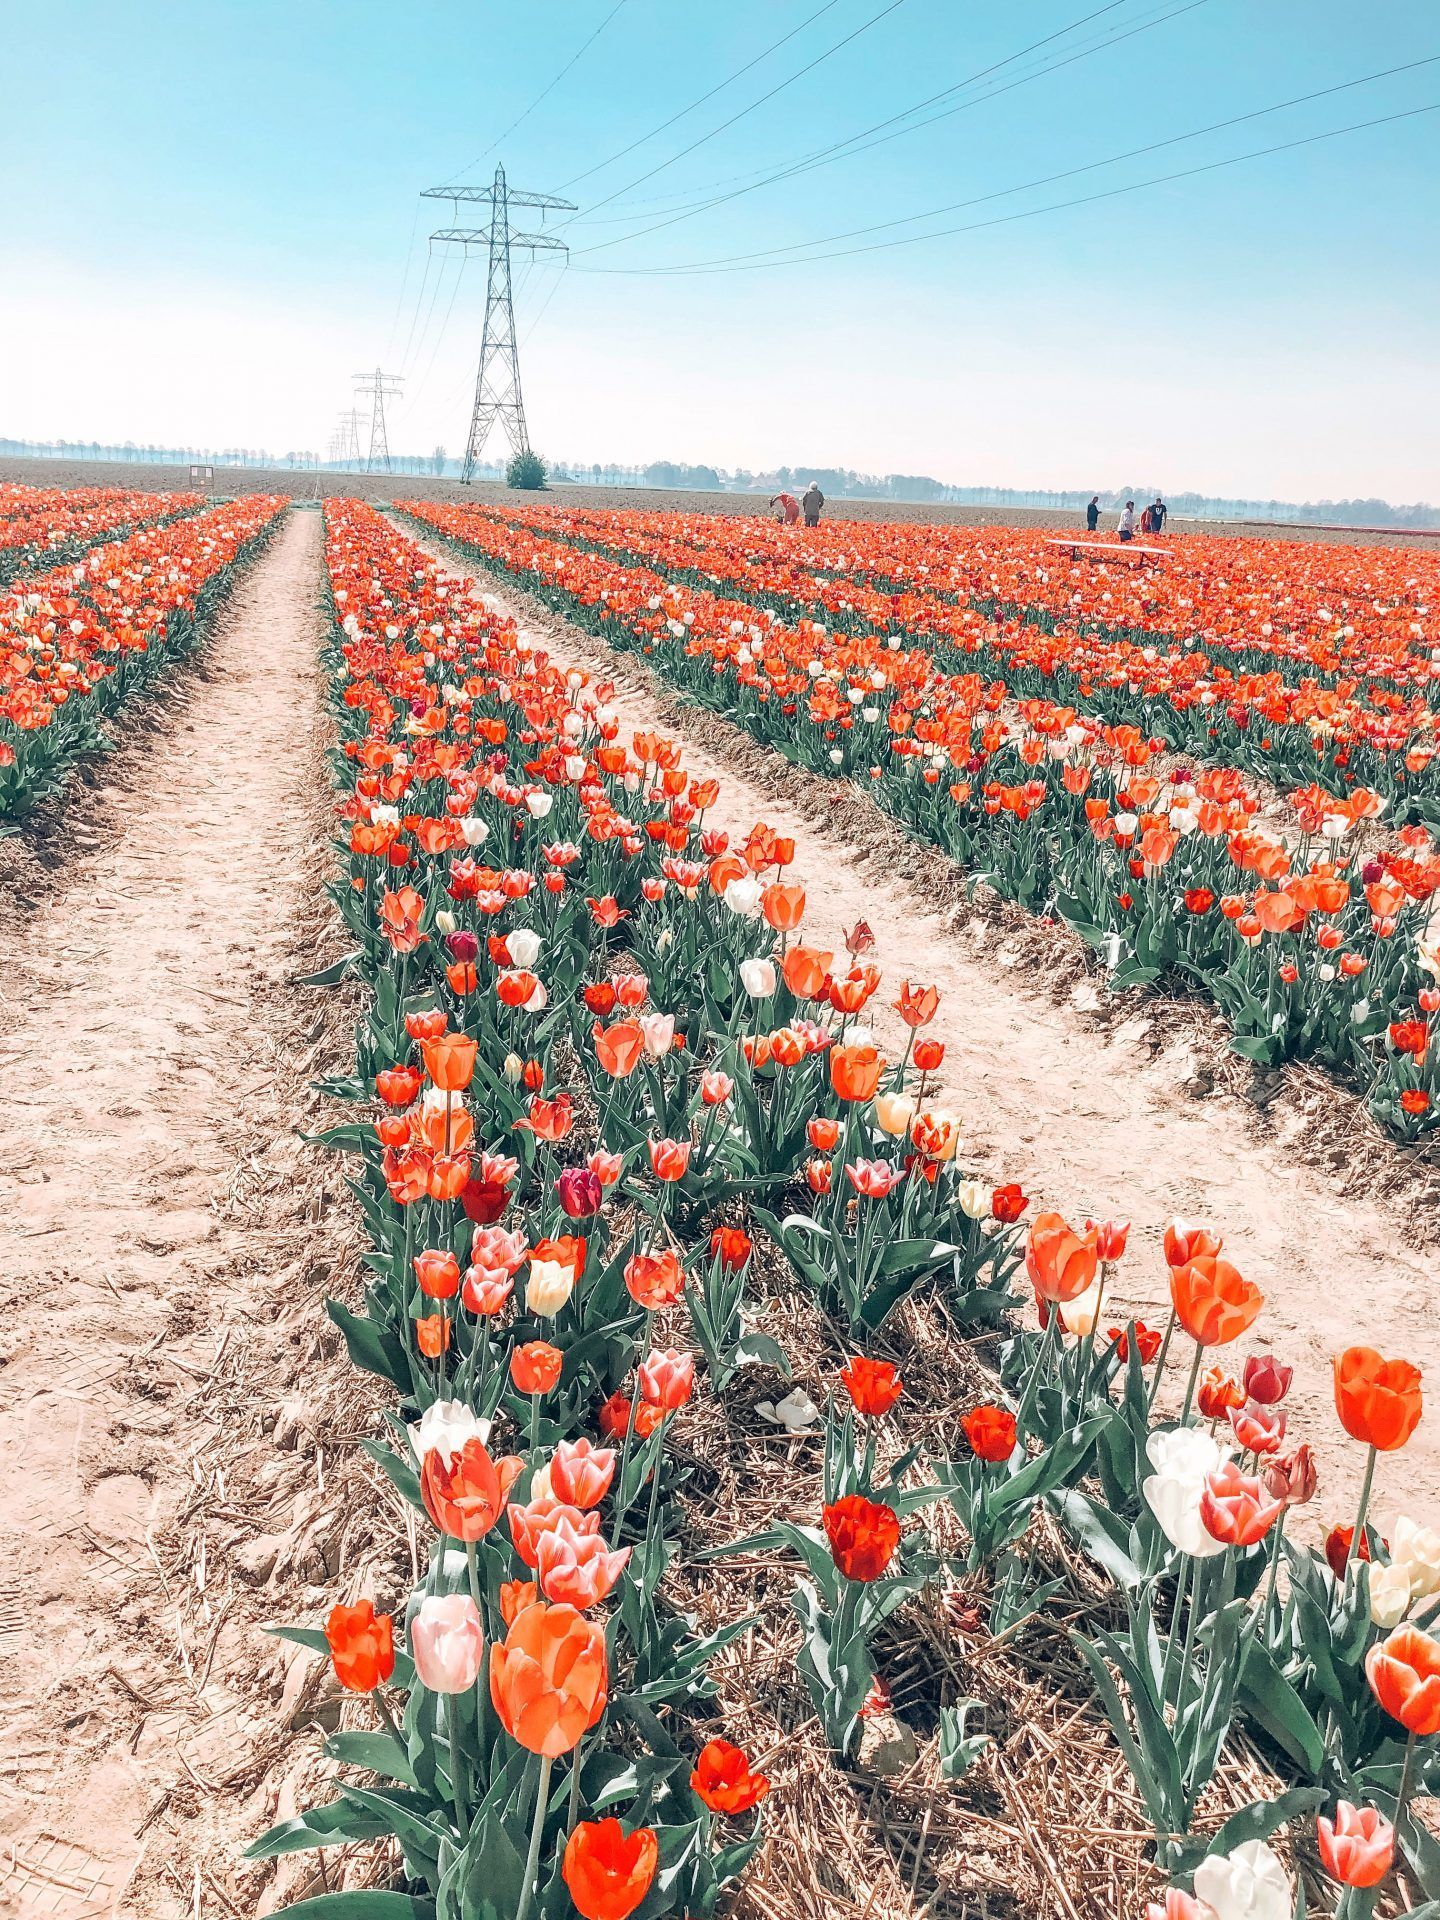  Landwirtschaft Hintergrundbild 1440x1920. A Non Touristy Guide To The Tulip Fields In The Netherlands. Aesthetic Background, Photo Wall Collage, Nature Photography